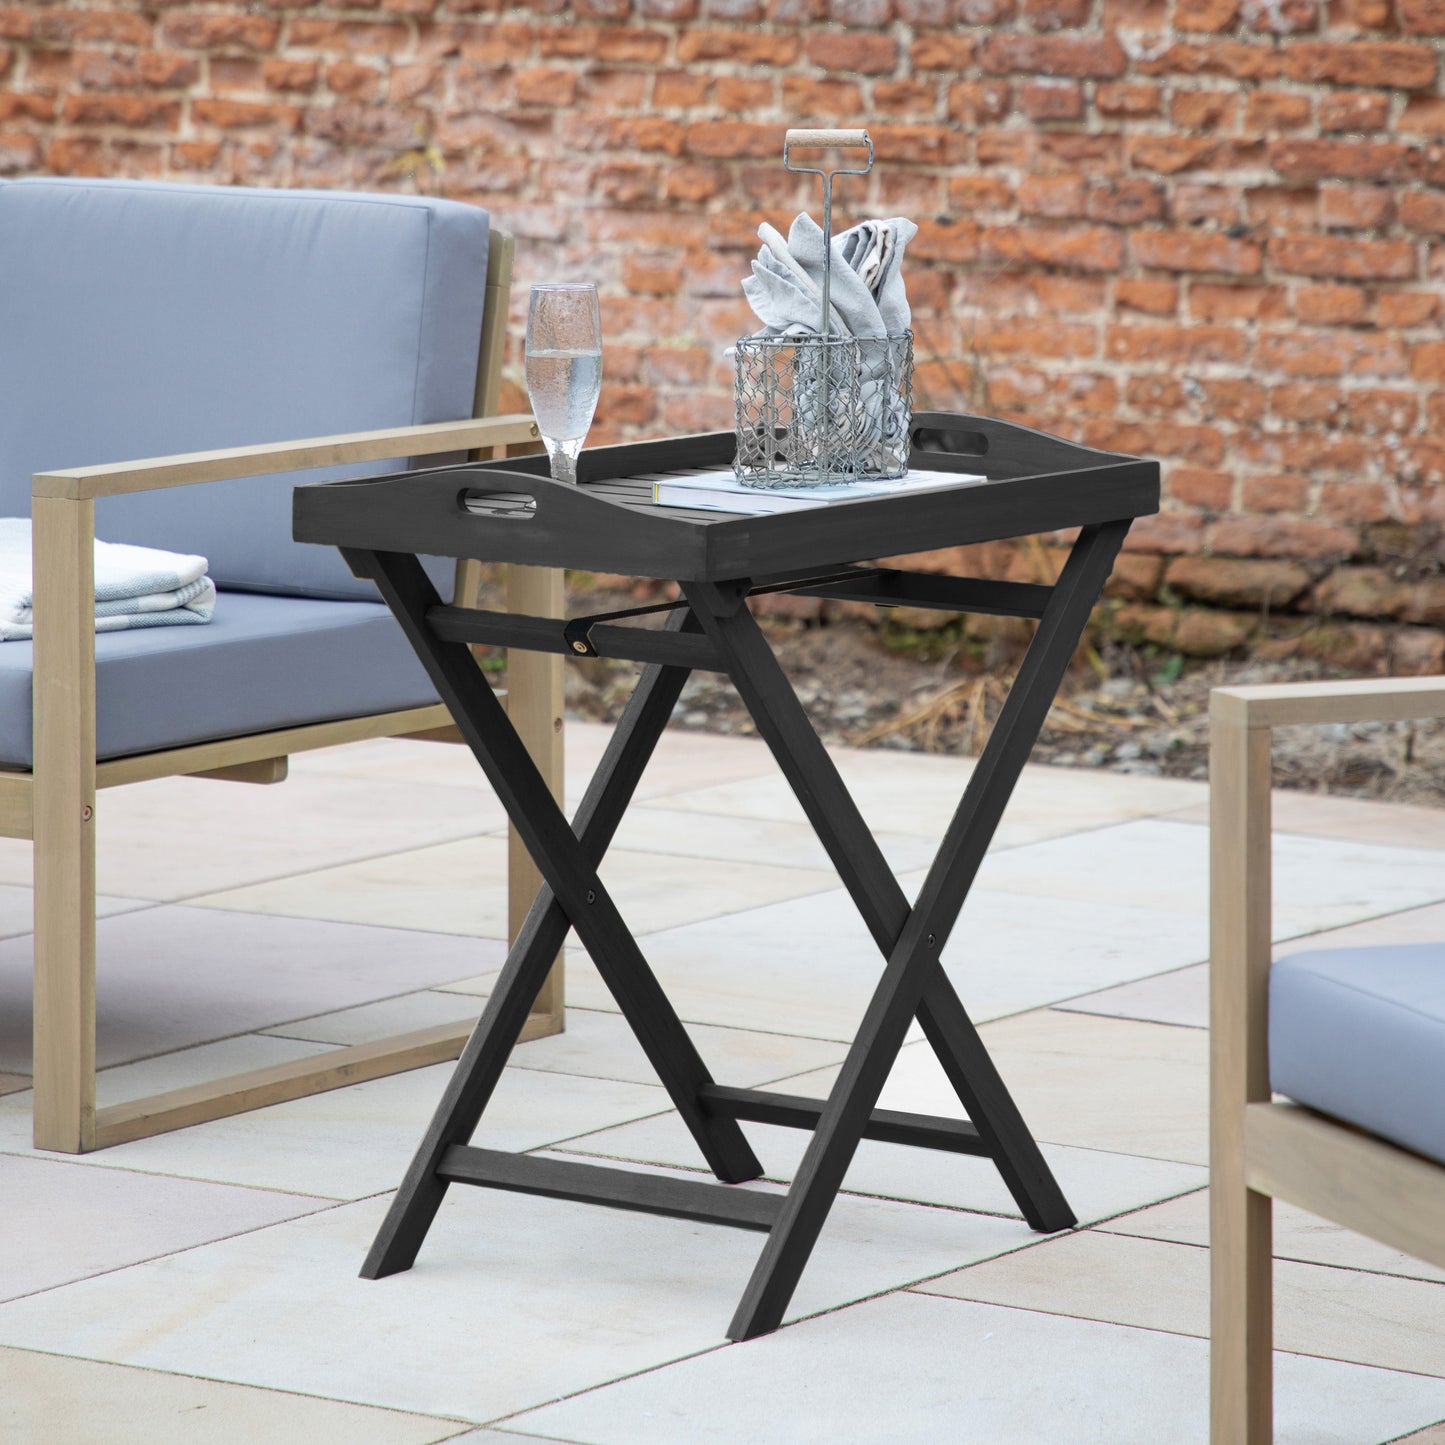 A patio with stylish Alfrington Tray Table Charcoal and chairs from Kikiathome.co.uk, perfect for enhancing your home's interior decor.